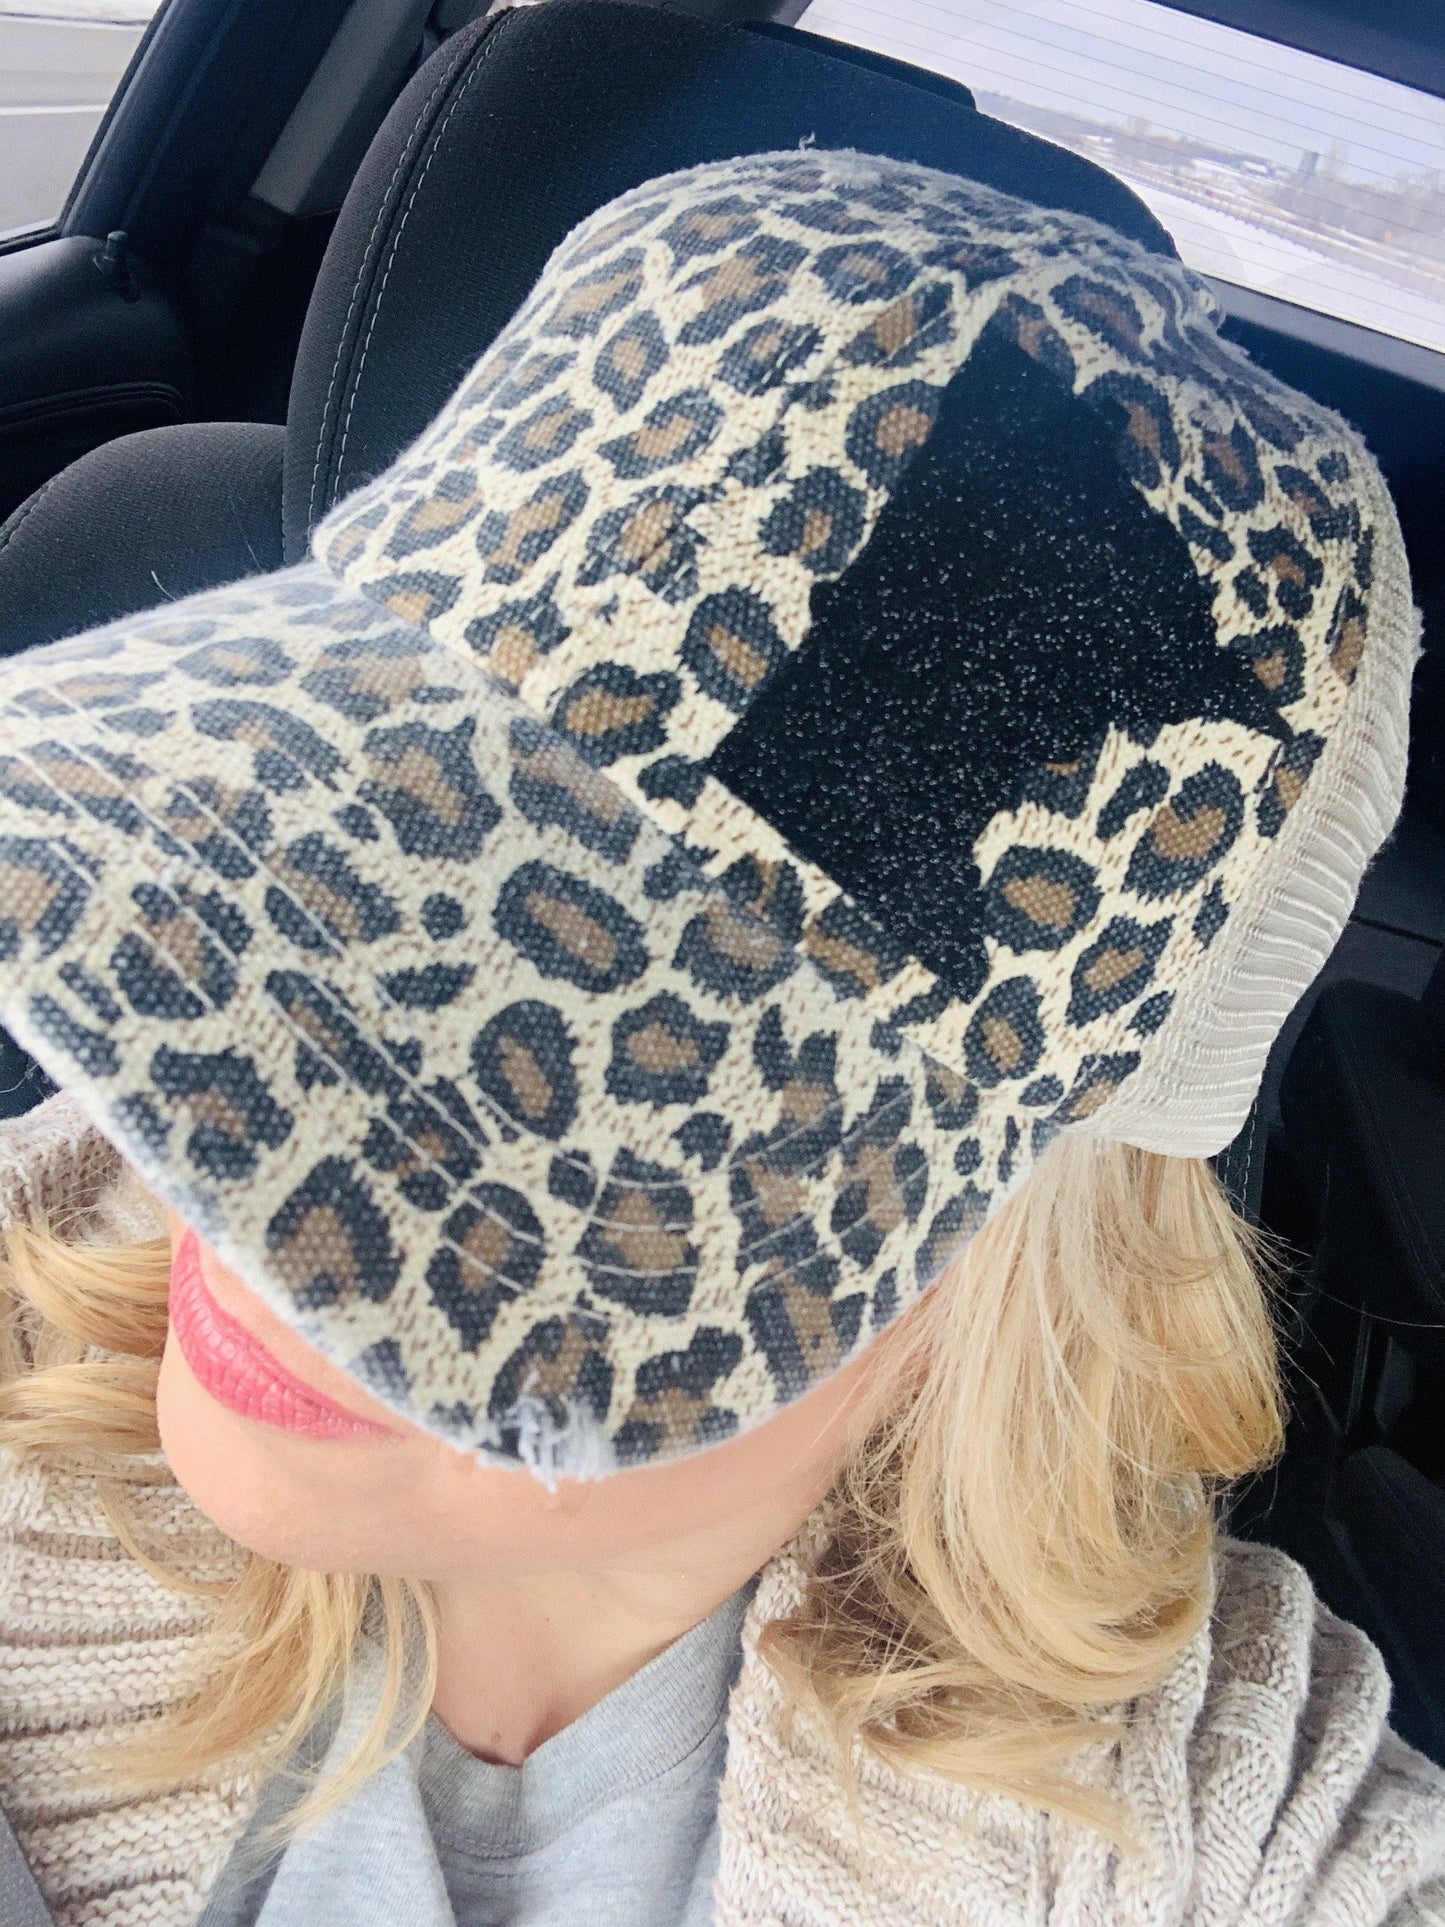 Leopard print state hats Minnesota or any state Baseball trucker cap animal print - Stacy's Pink Martini Boutique